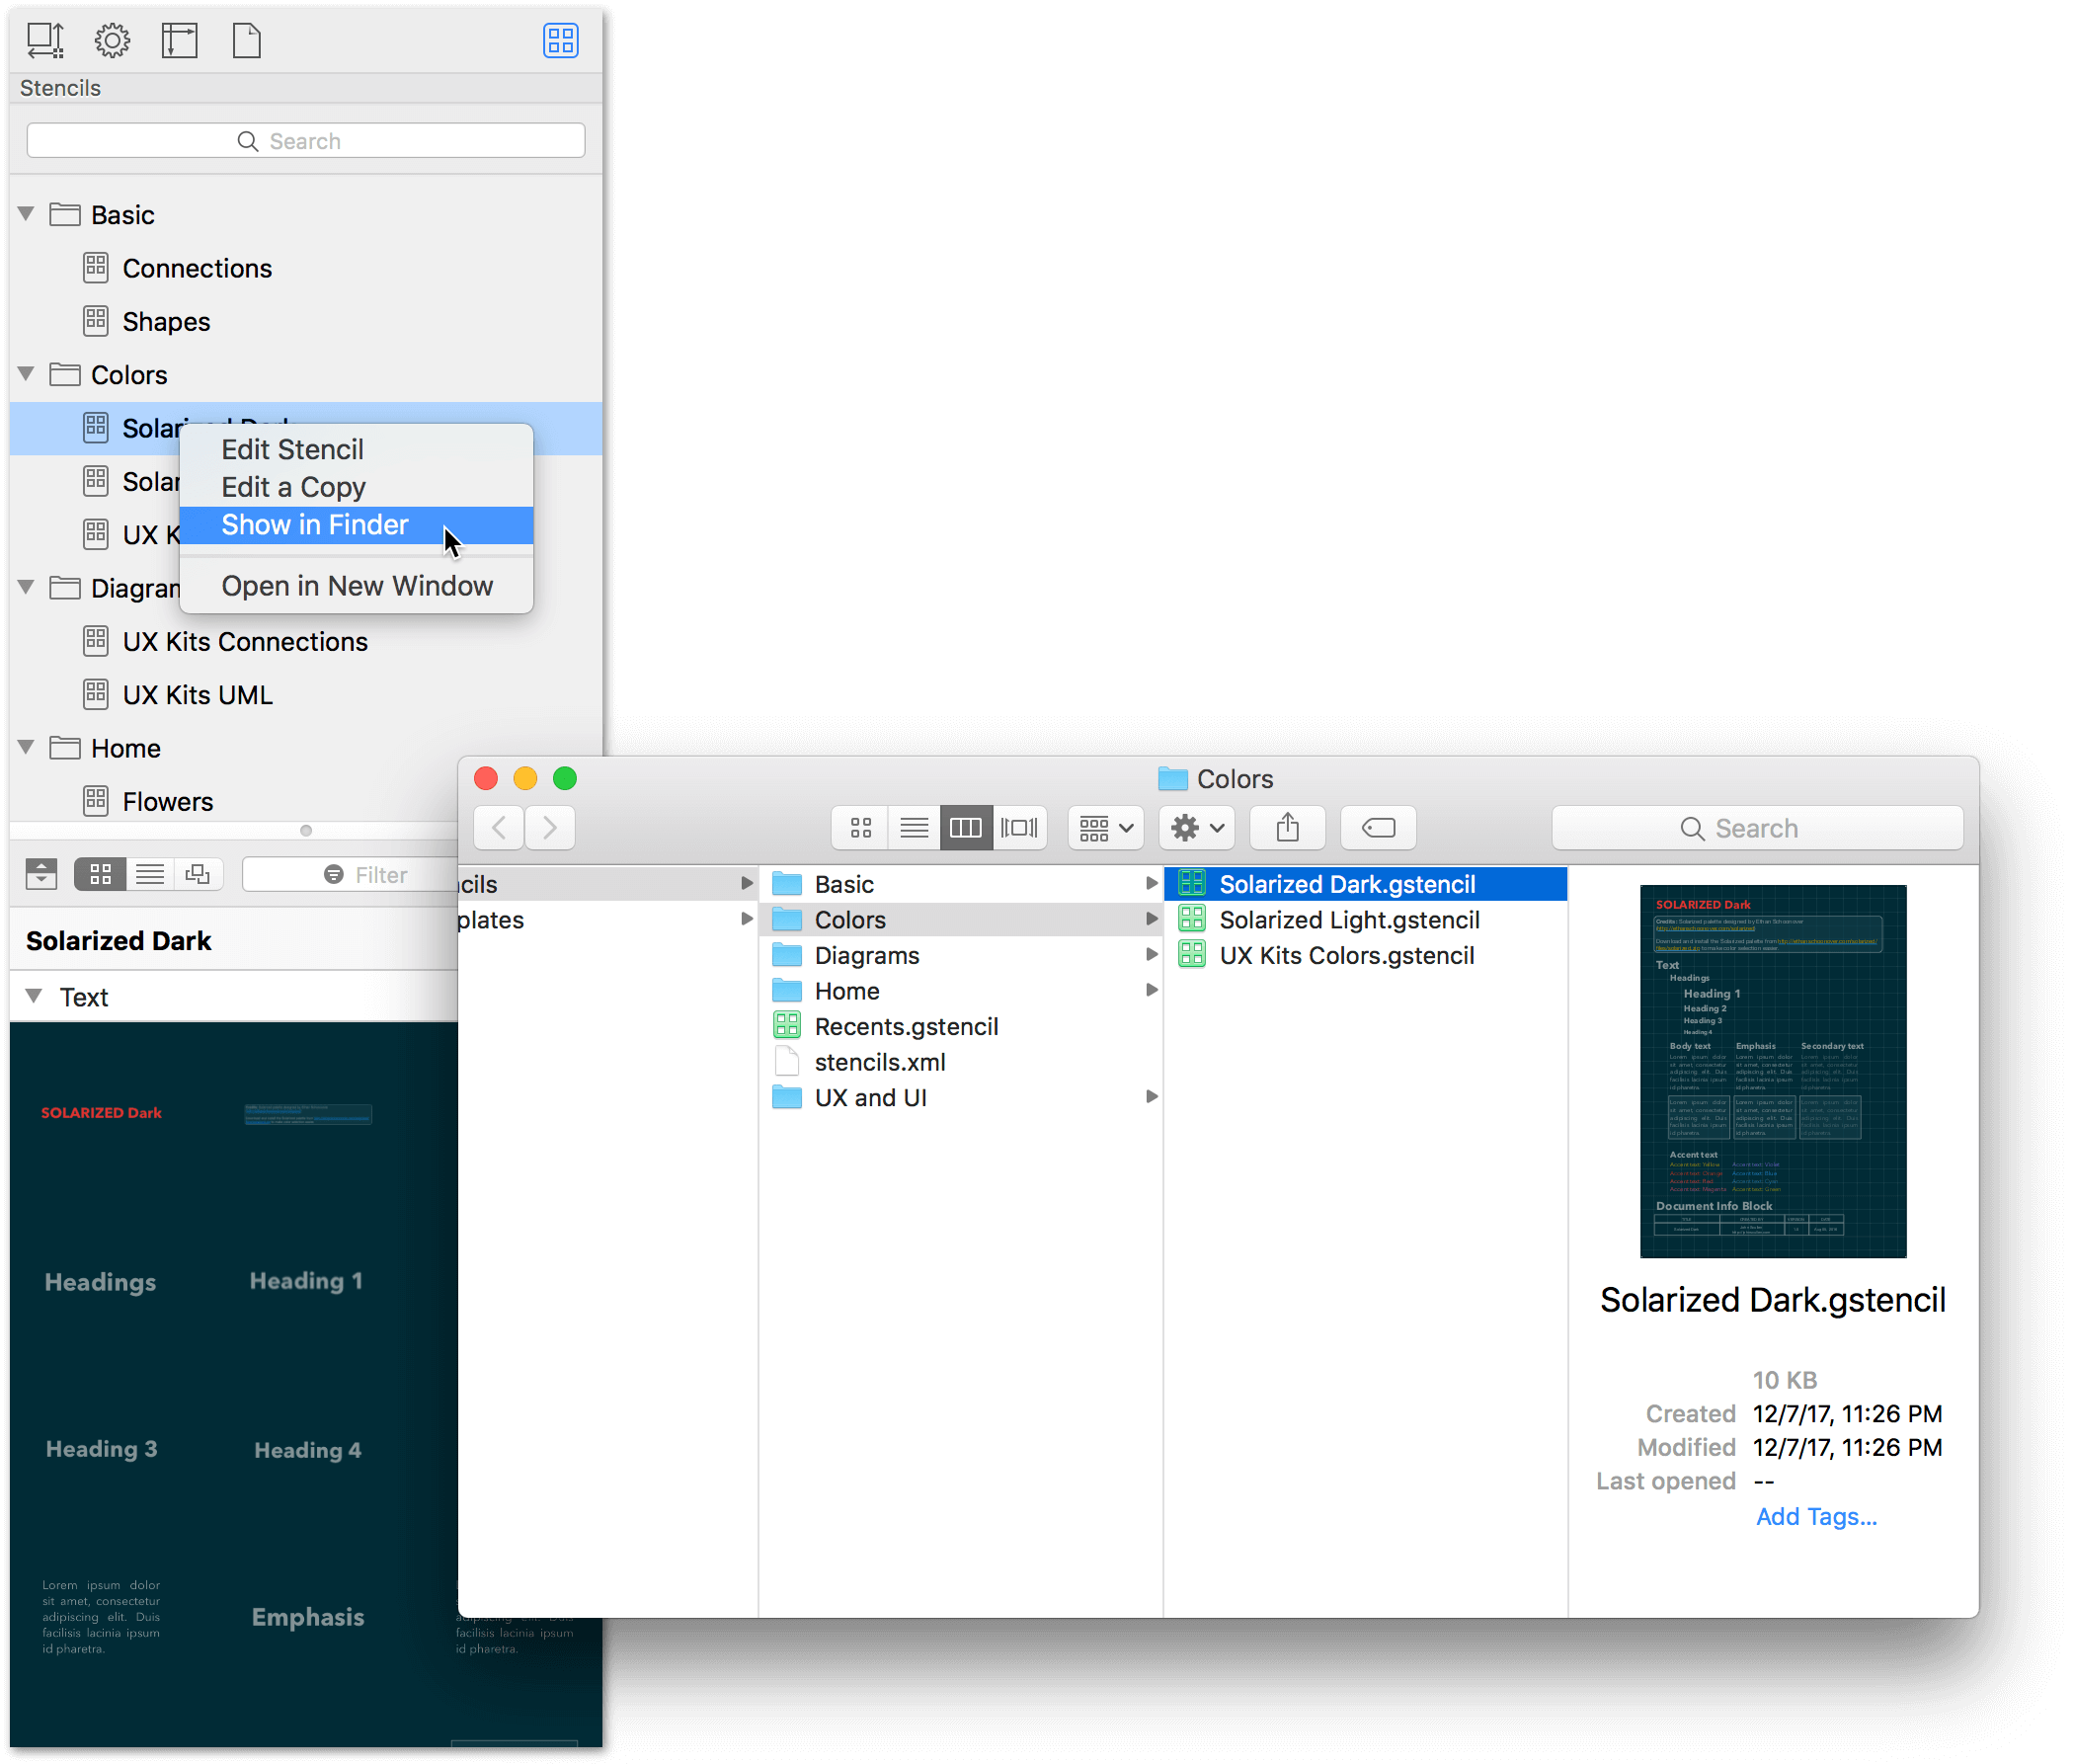 The Stencil Browser is shown in the right sidebar, with the Solarized Dark stencil set selected in the Stencil List. After Control-clicking on the stencil, its contextual menu appears, from which you can choose Show in Finder.